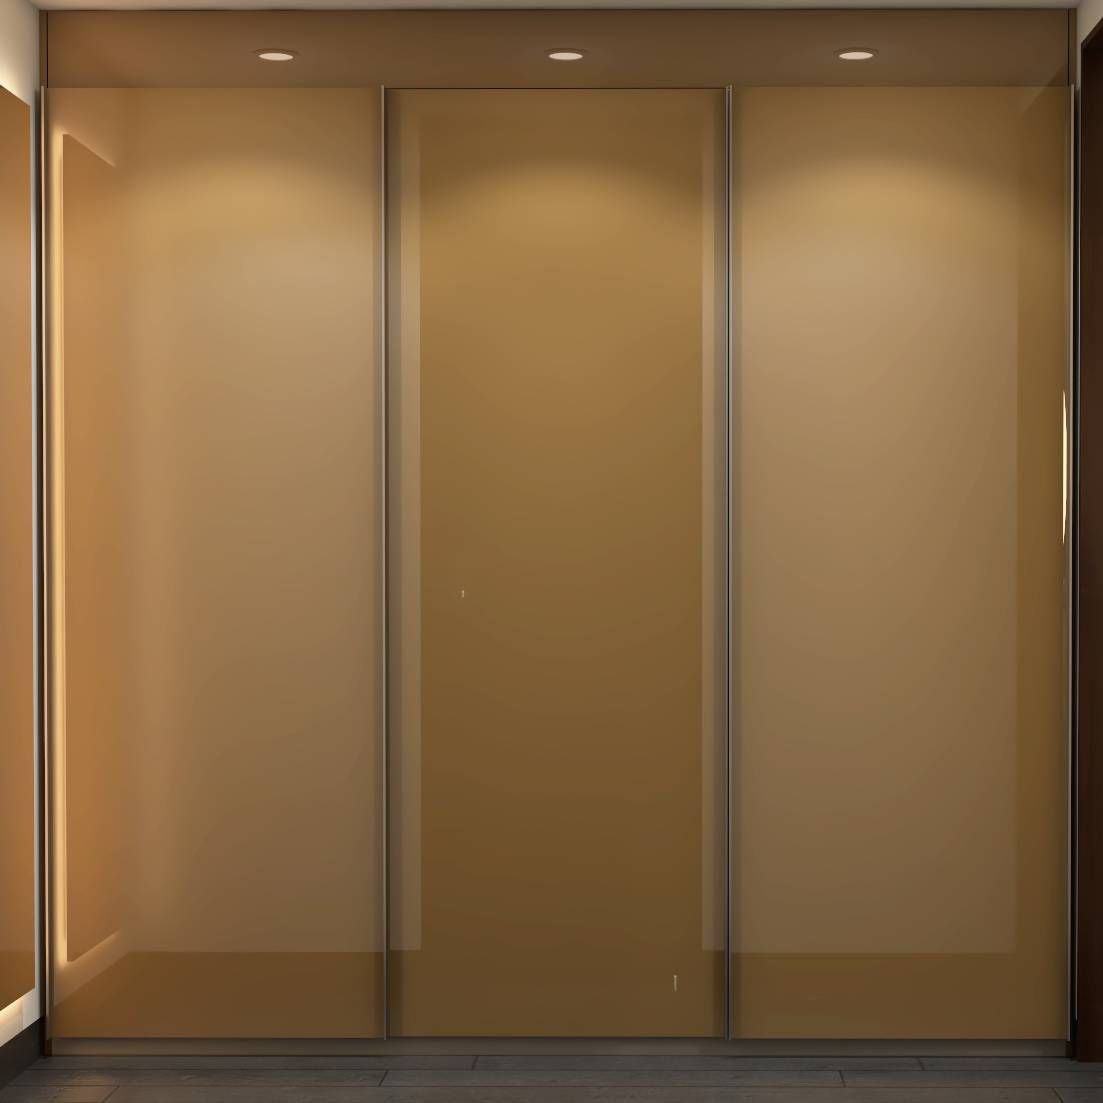 Contemporary 3-Door Wardrobe Design With A Glossy Brown Finish